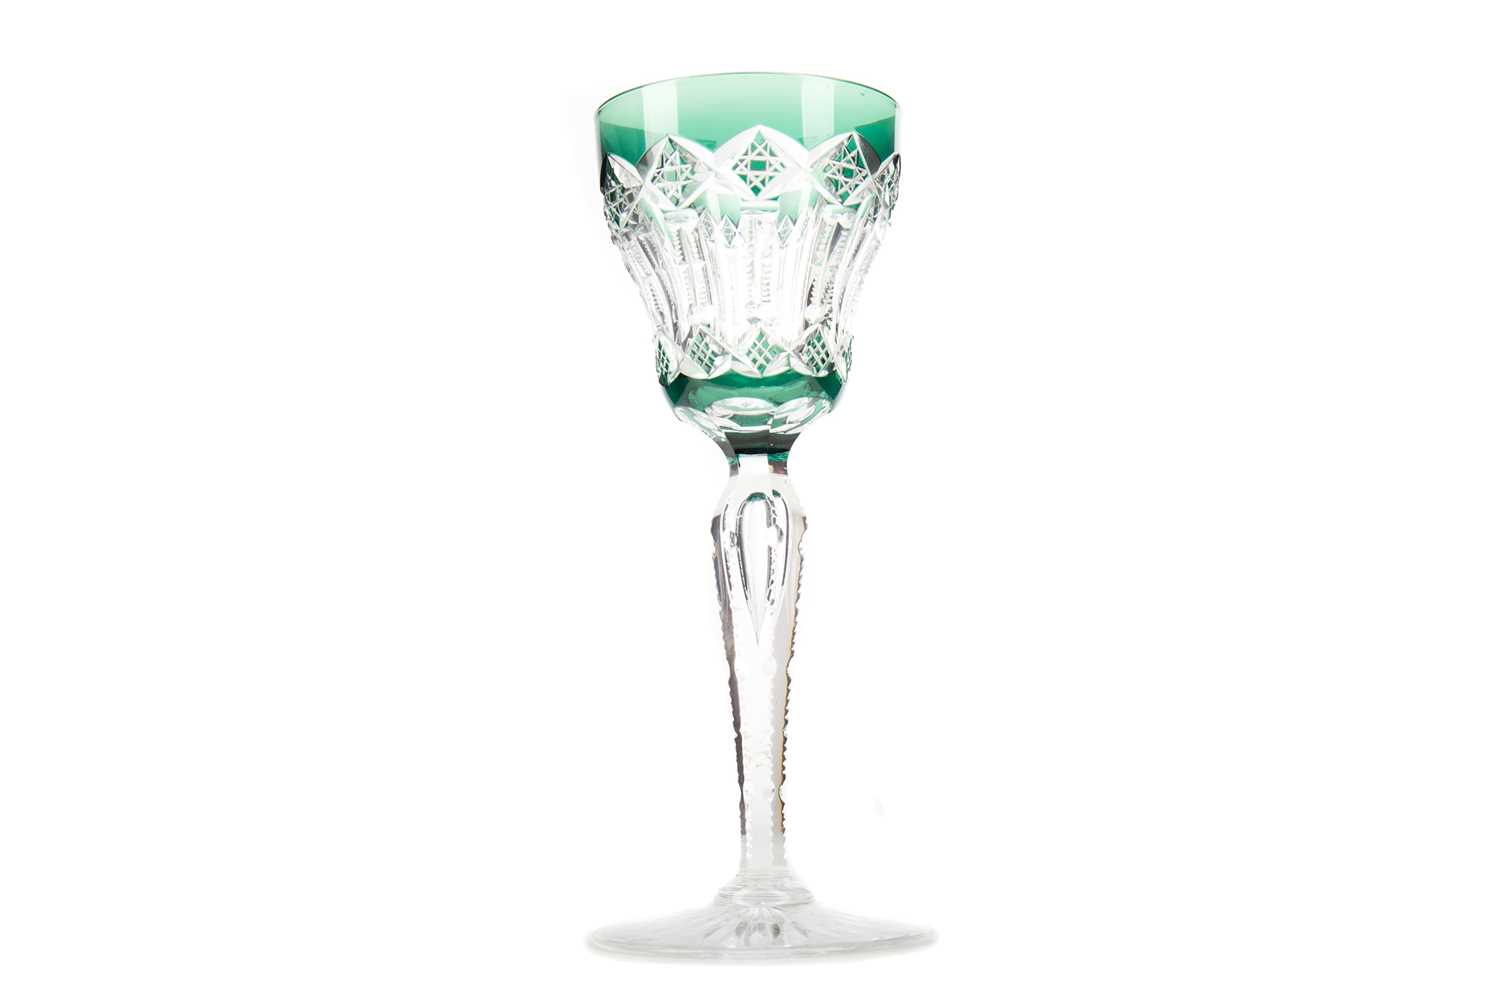 A GOOD EMERALD FLASHED HOCK GLASS ATTRIBUTED TO STEVENS & WILLIAMS